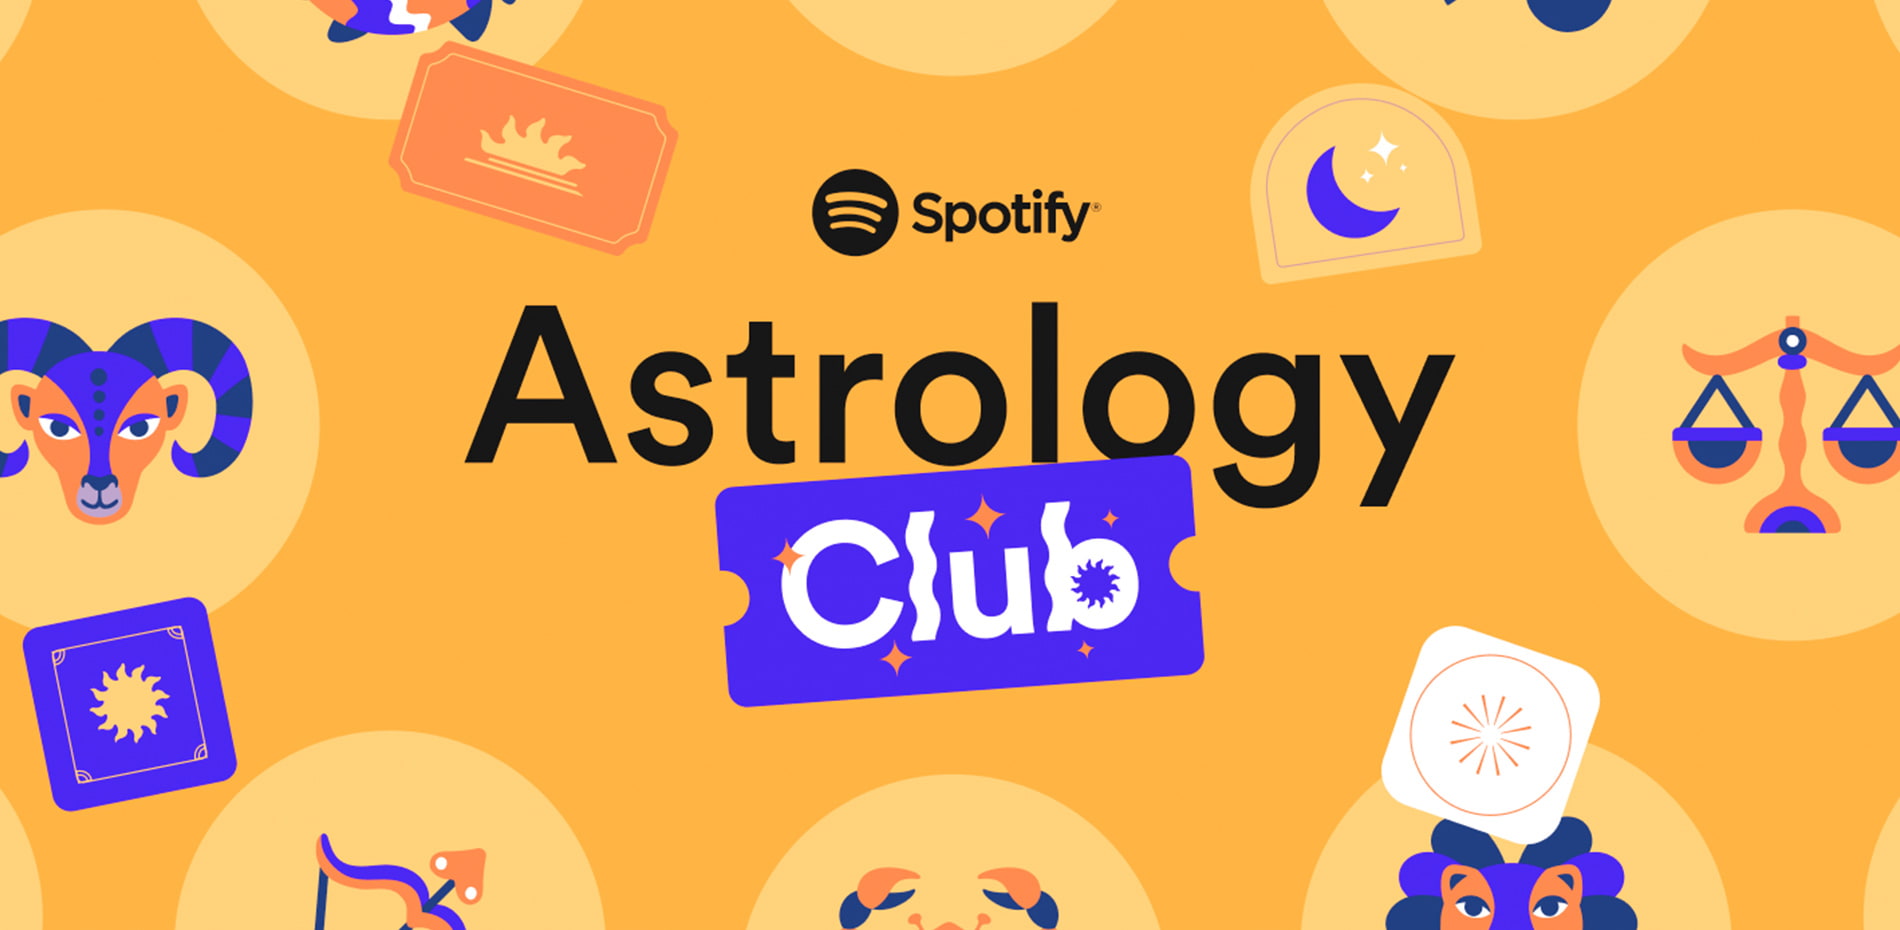 Astrology Club by Spotify, Makemepulse Wins SOTM OCTOBER 2022